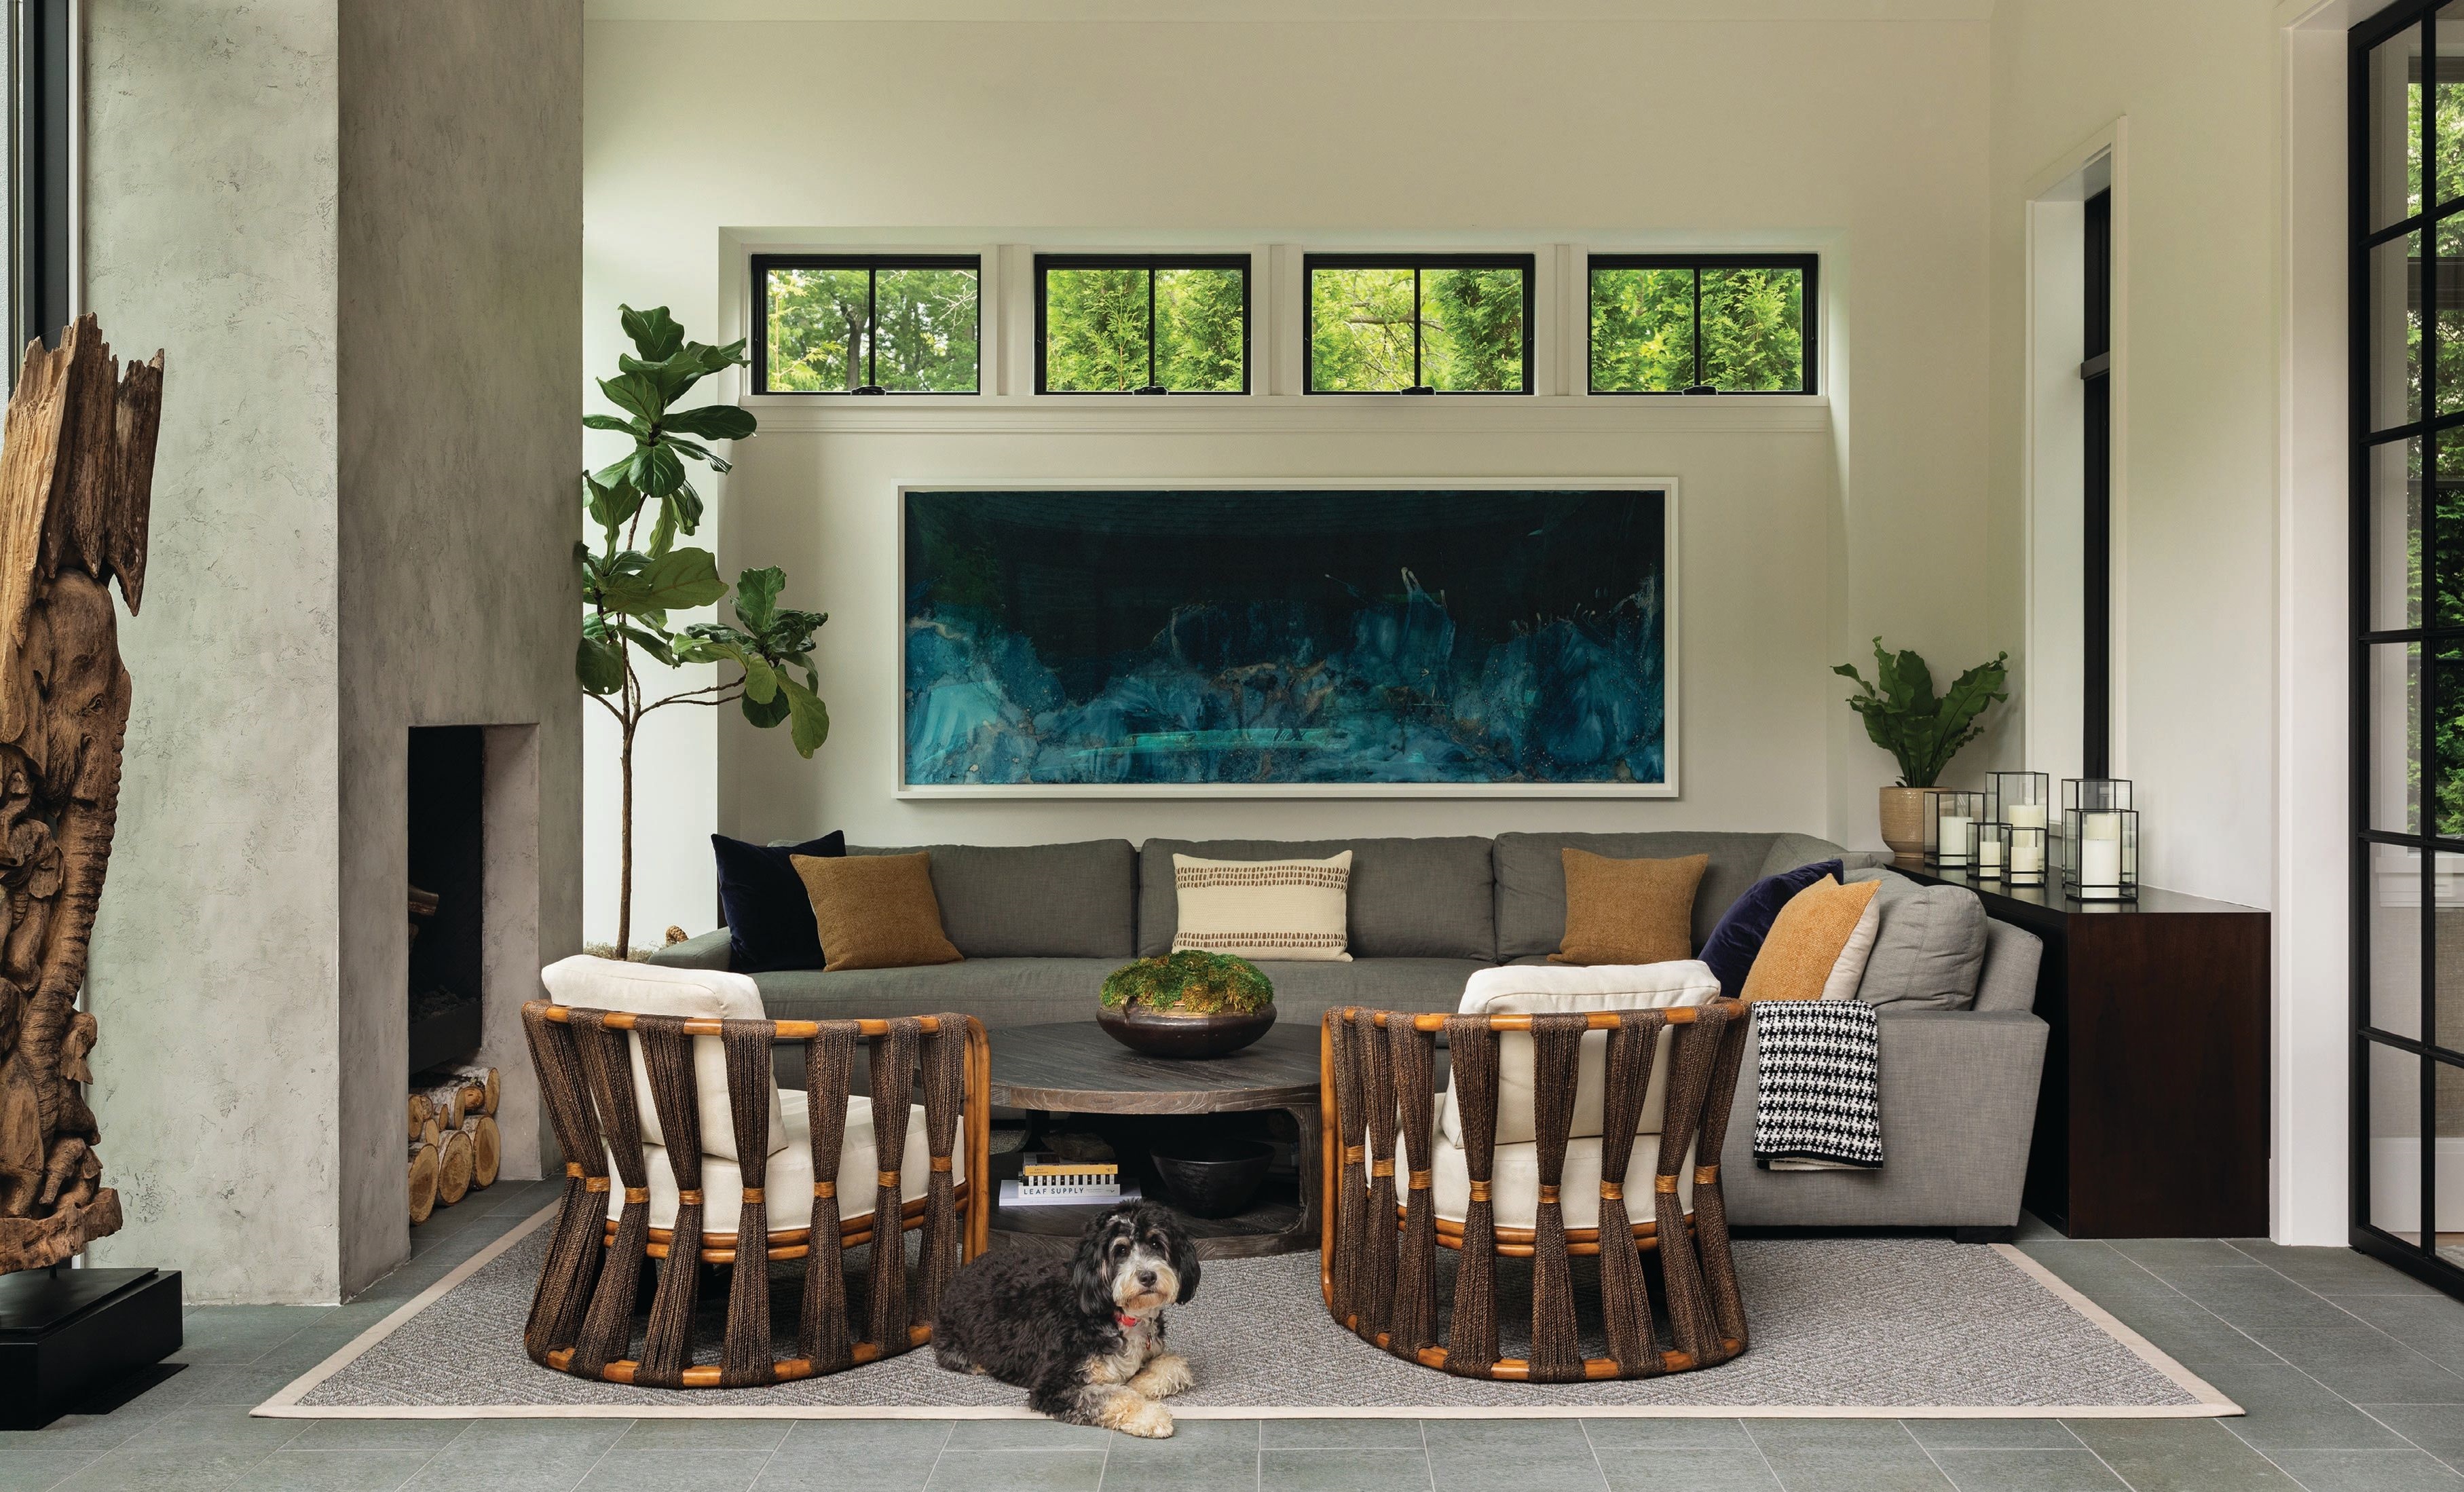 The four seasons room beckons year-round with chic Strings Attached lounge chairs by Palacek, a Maxwell sectional from RH and artist Meghann Riepenhoff’s “Sea Wall Sea Stack II.” Photographed by Aimée Mazzenga